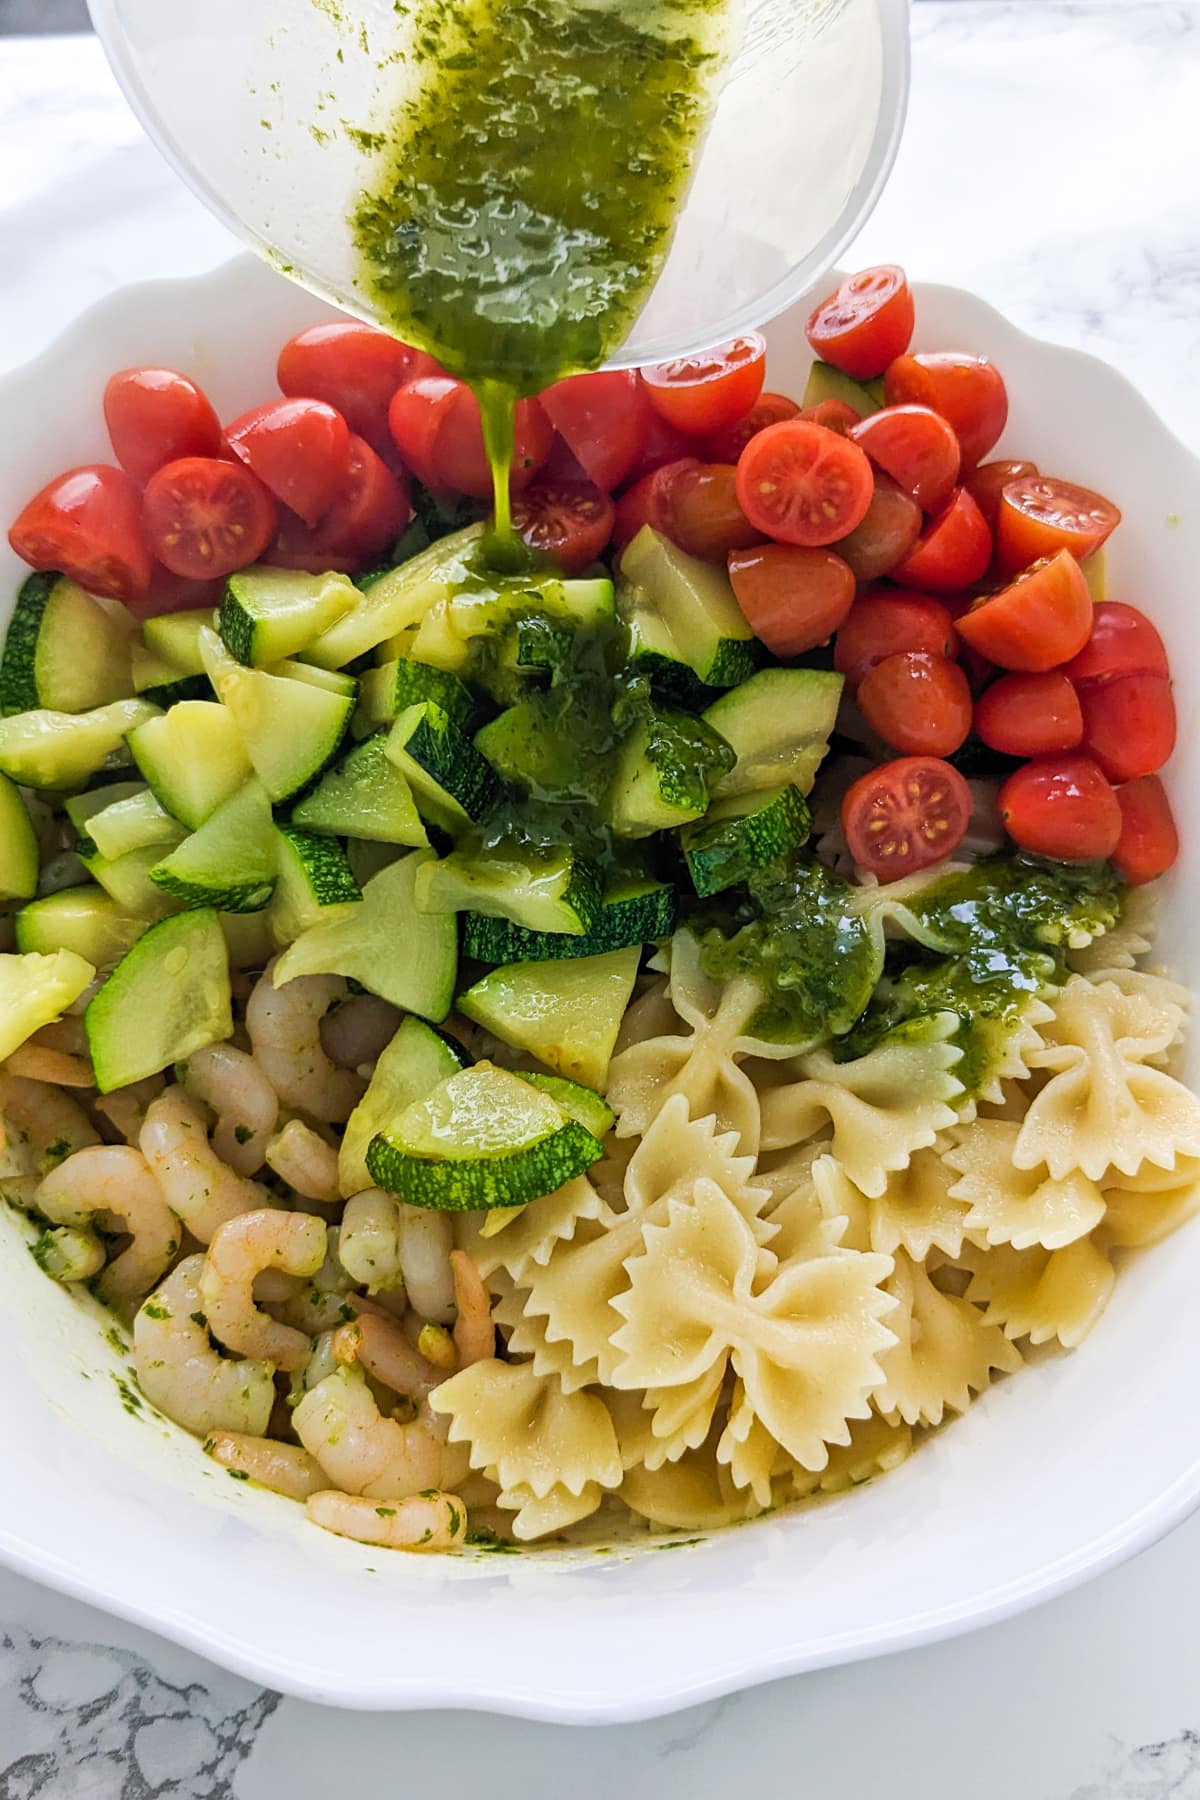 Pouring pesto sauce over cucumbers, cherry tomatoes, pasta and shrimp.